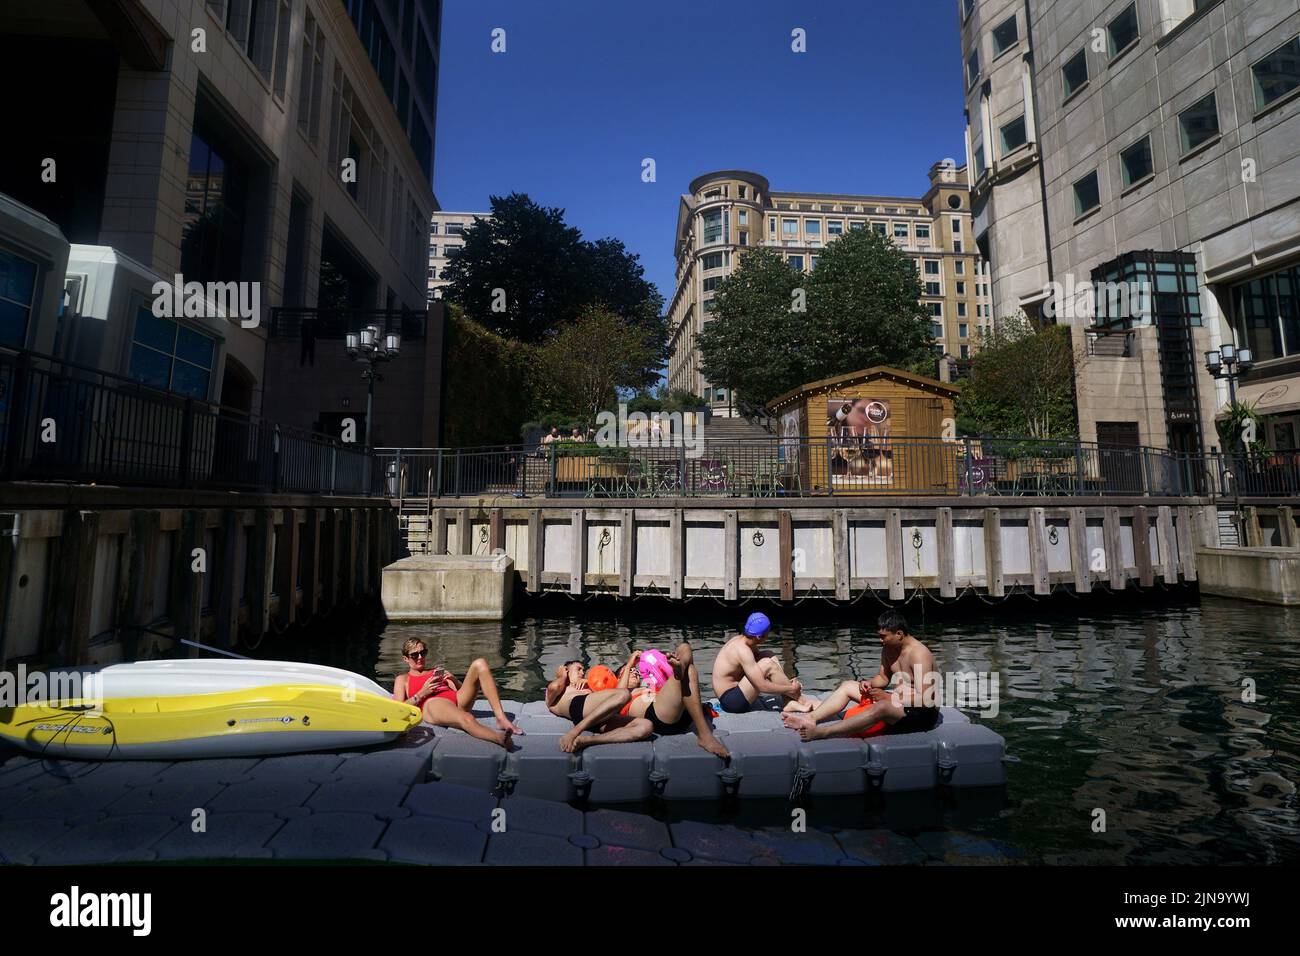 A group of swimmers sunbathe next to the new open water swimming venue in Canary Wharf during warm weather in east London. The Met Office has issued an amber warning for extreme heat covering four days from Thursday to Sunday for parts of England and Wales as a new heatwave looms. Picture date: Wednesday August 10, 2022. Stock Photo